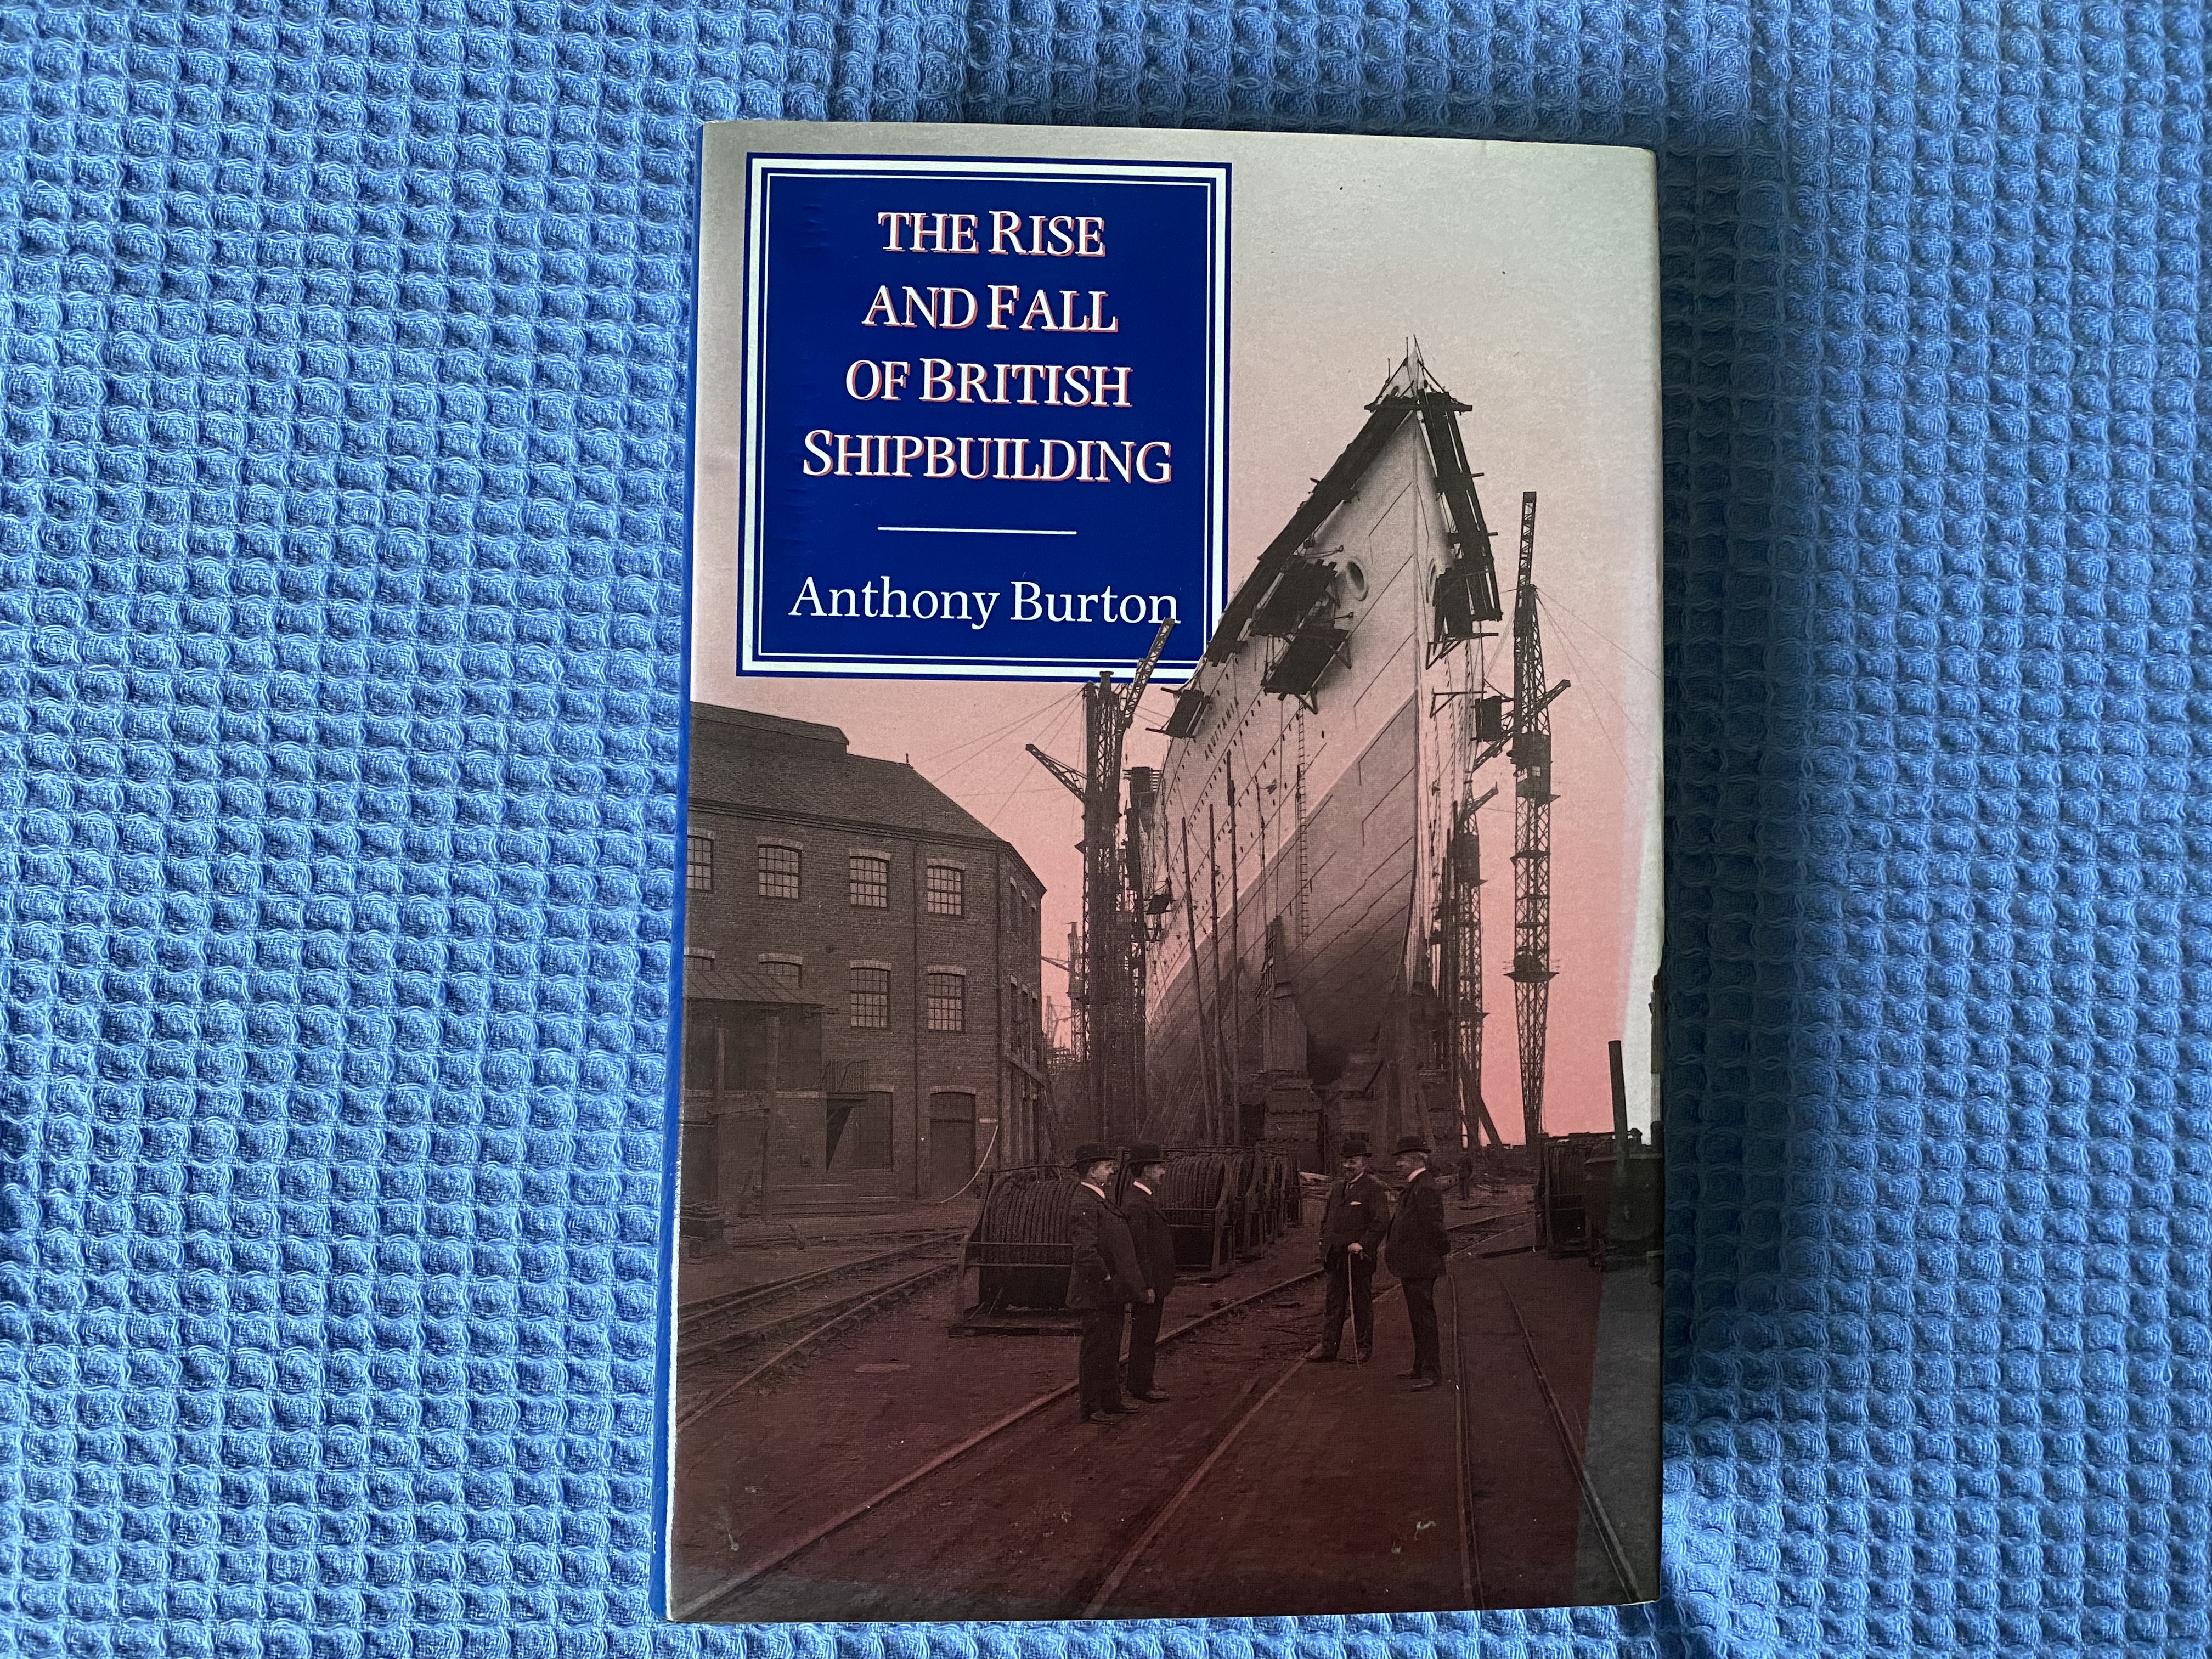 A GREAT BOOK BY ANTHONY BURTON ENTITLED THE RISE AND FALL OF BRITISH SHIPBUILDING